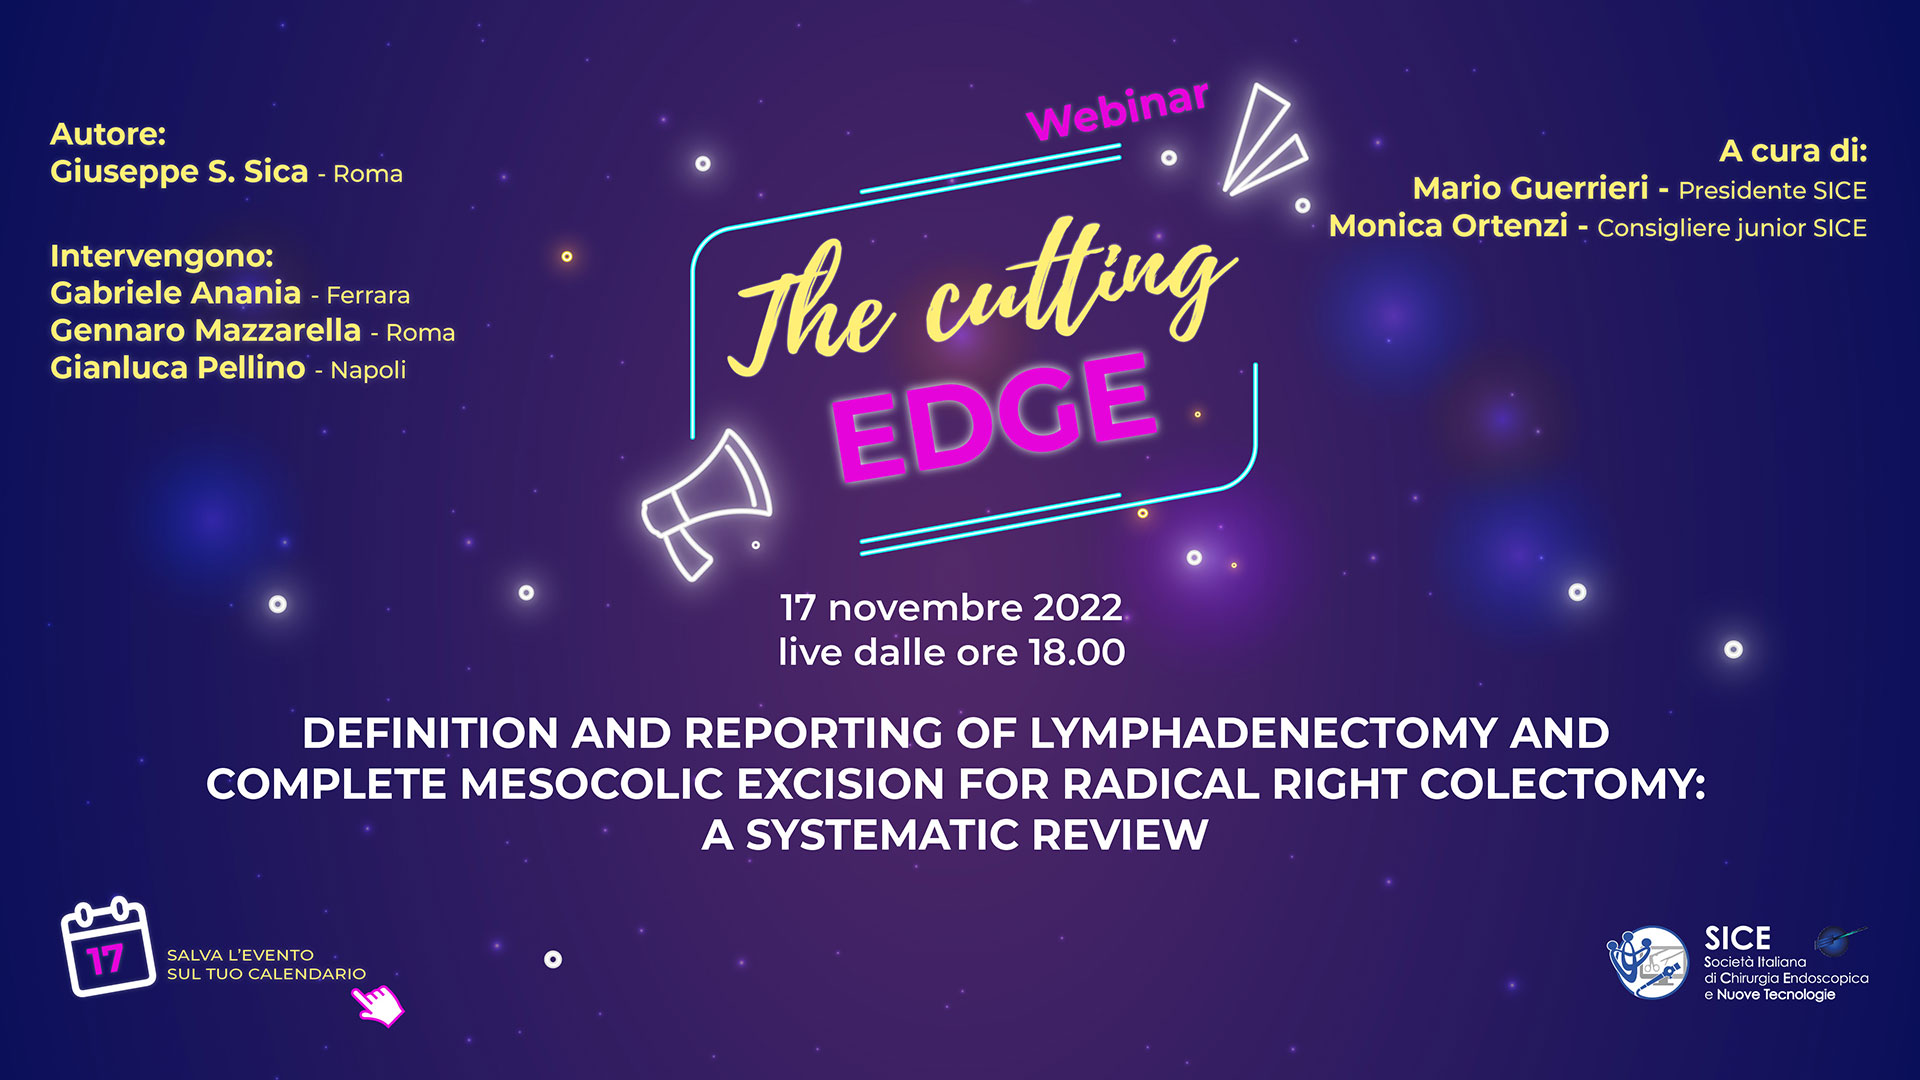 Definition and reporting of lymphadenectomy and complete mesocolic excision for radical right colectomy: a systematic review